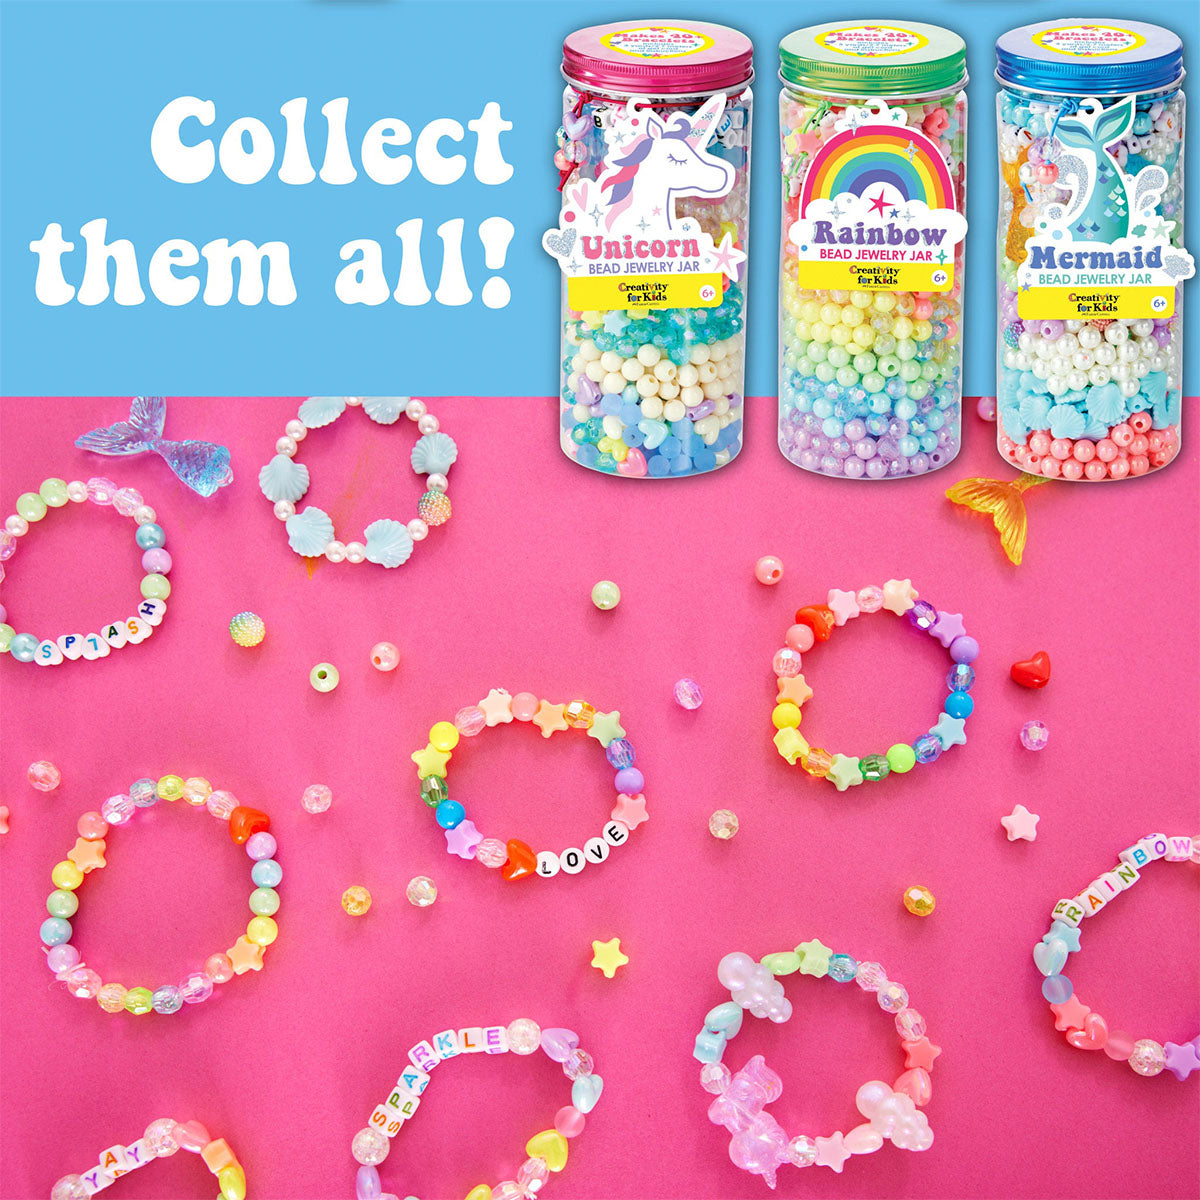 Collect them all! Unicorn, Rainbow, and Mermaid Jars Bead Jewelry by Creativity for Kids.